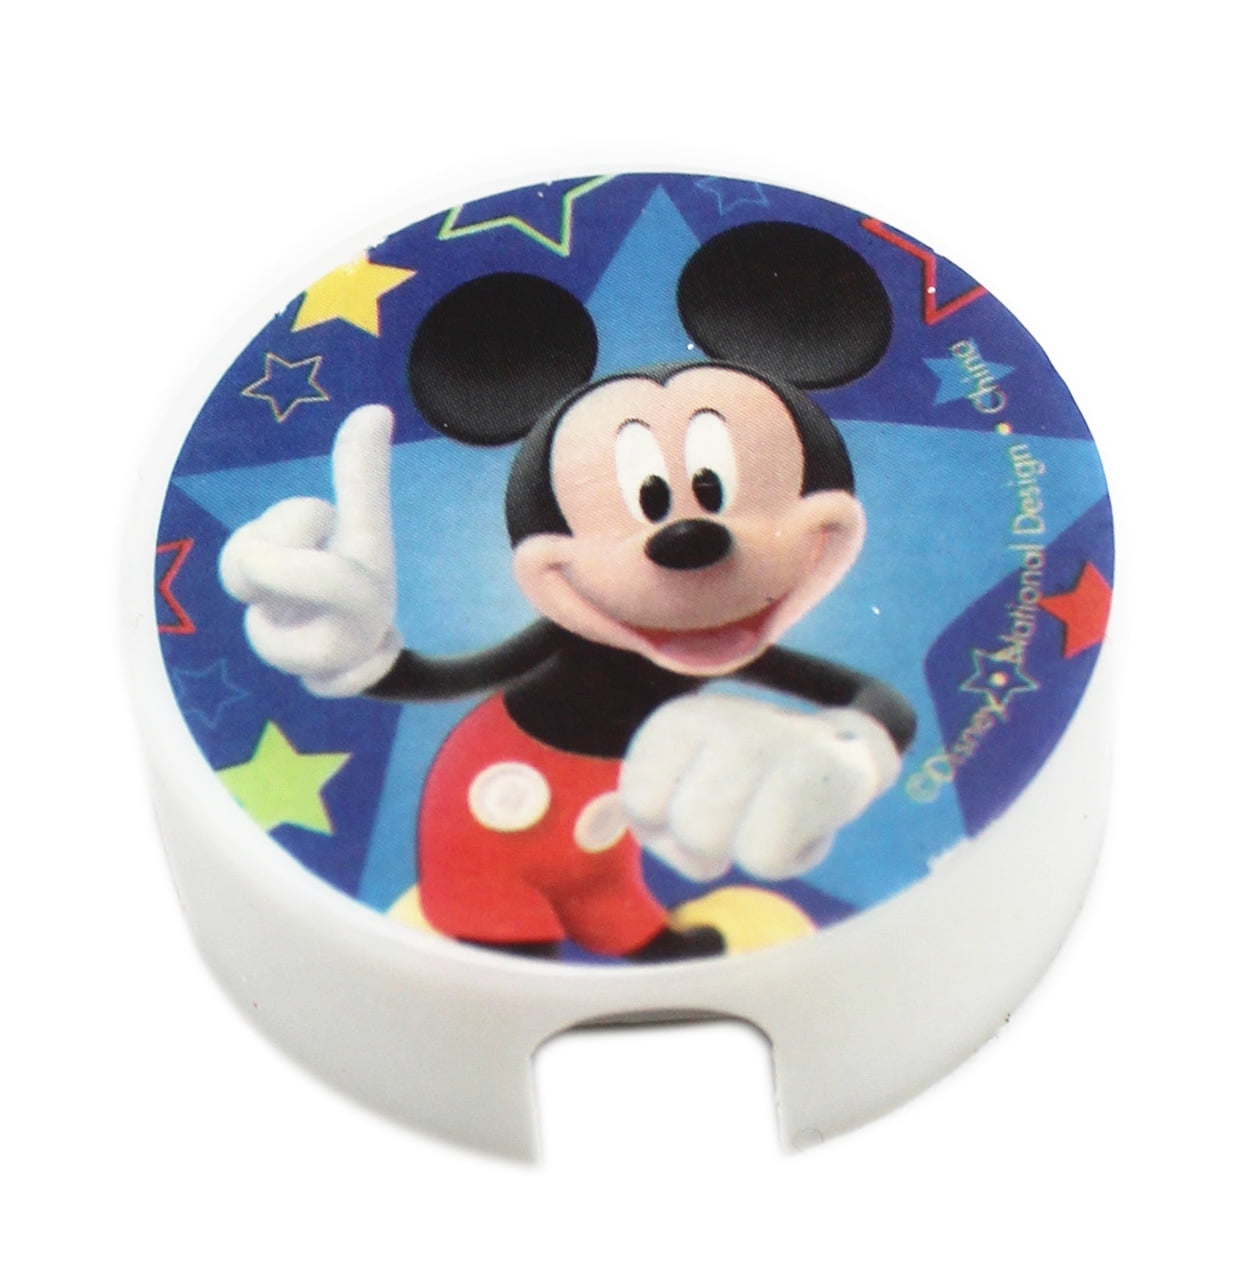 Officially Licensed Three Size Pencil Sharpener Disney Minnie Mouse 